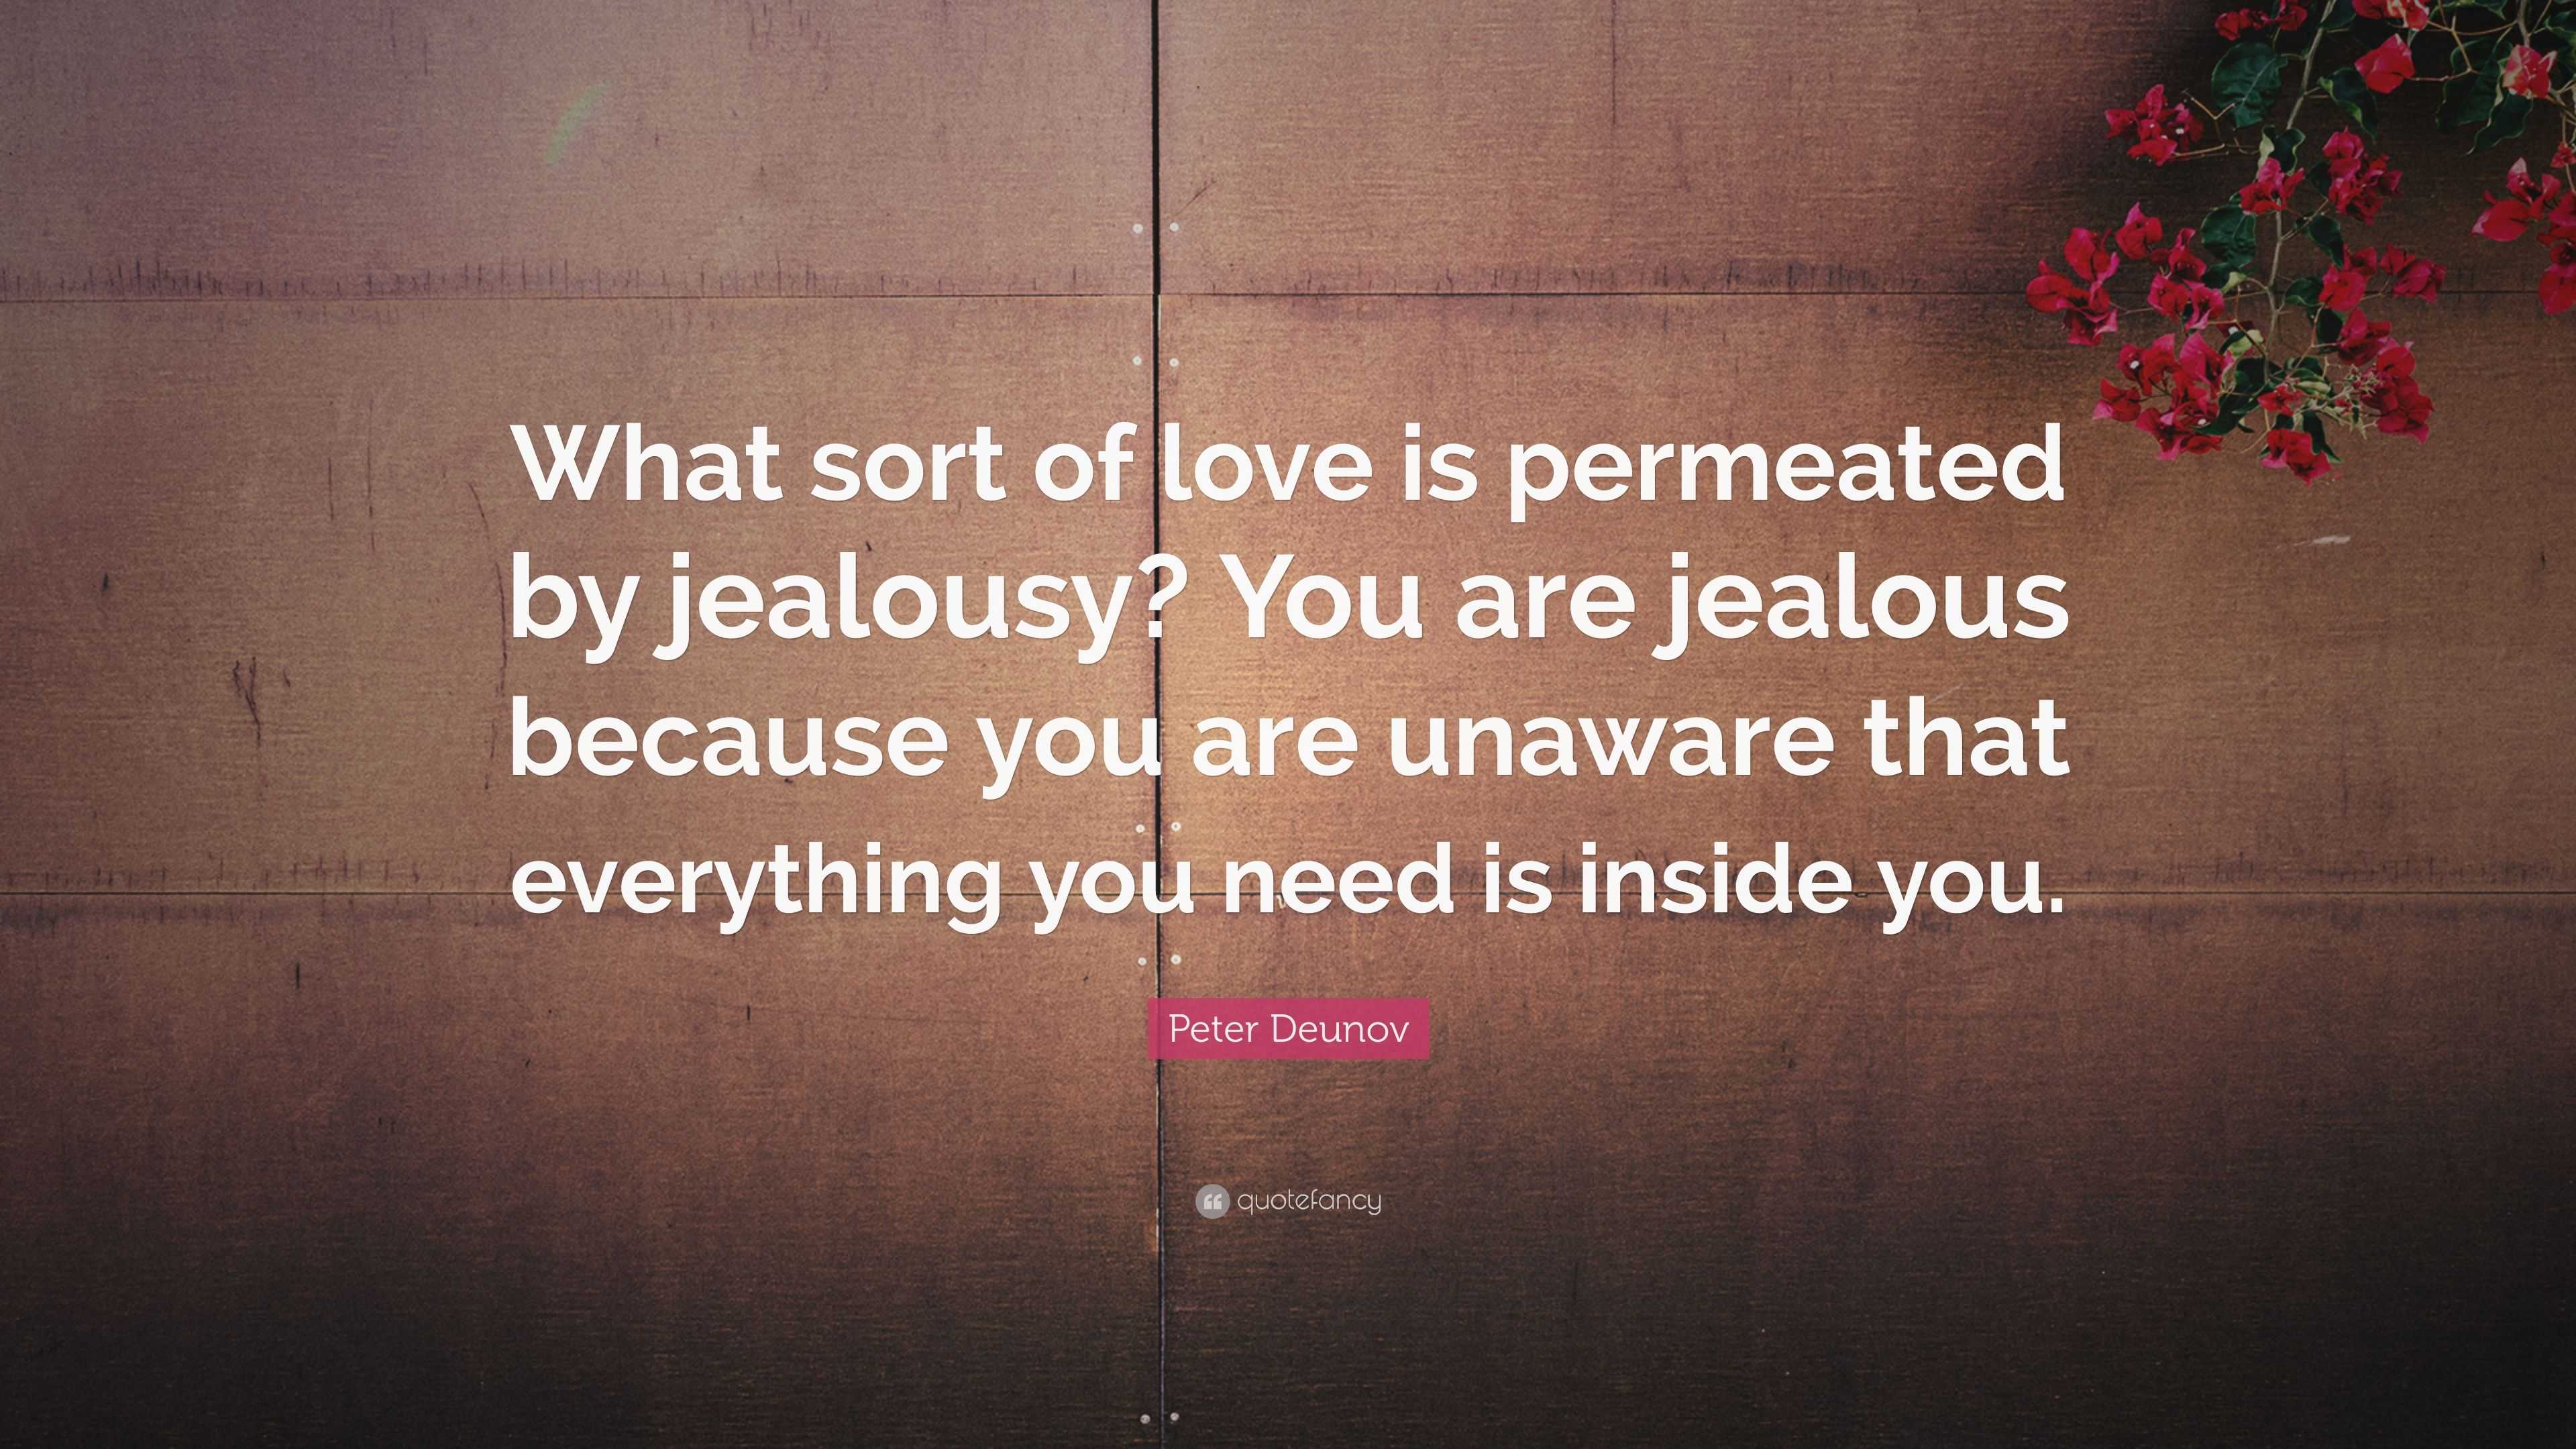 Peter Deunov Quote “What sort of love is permeated by jealousy You are